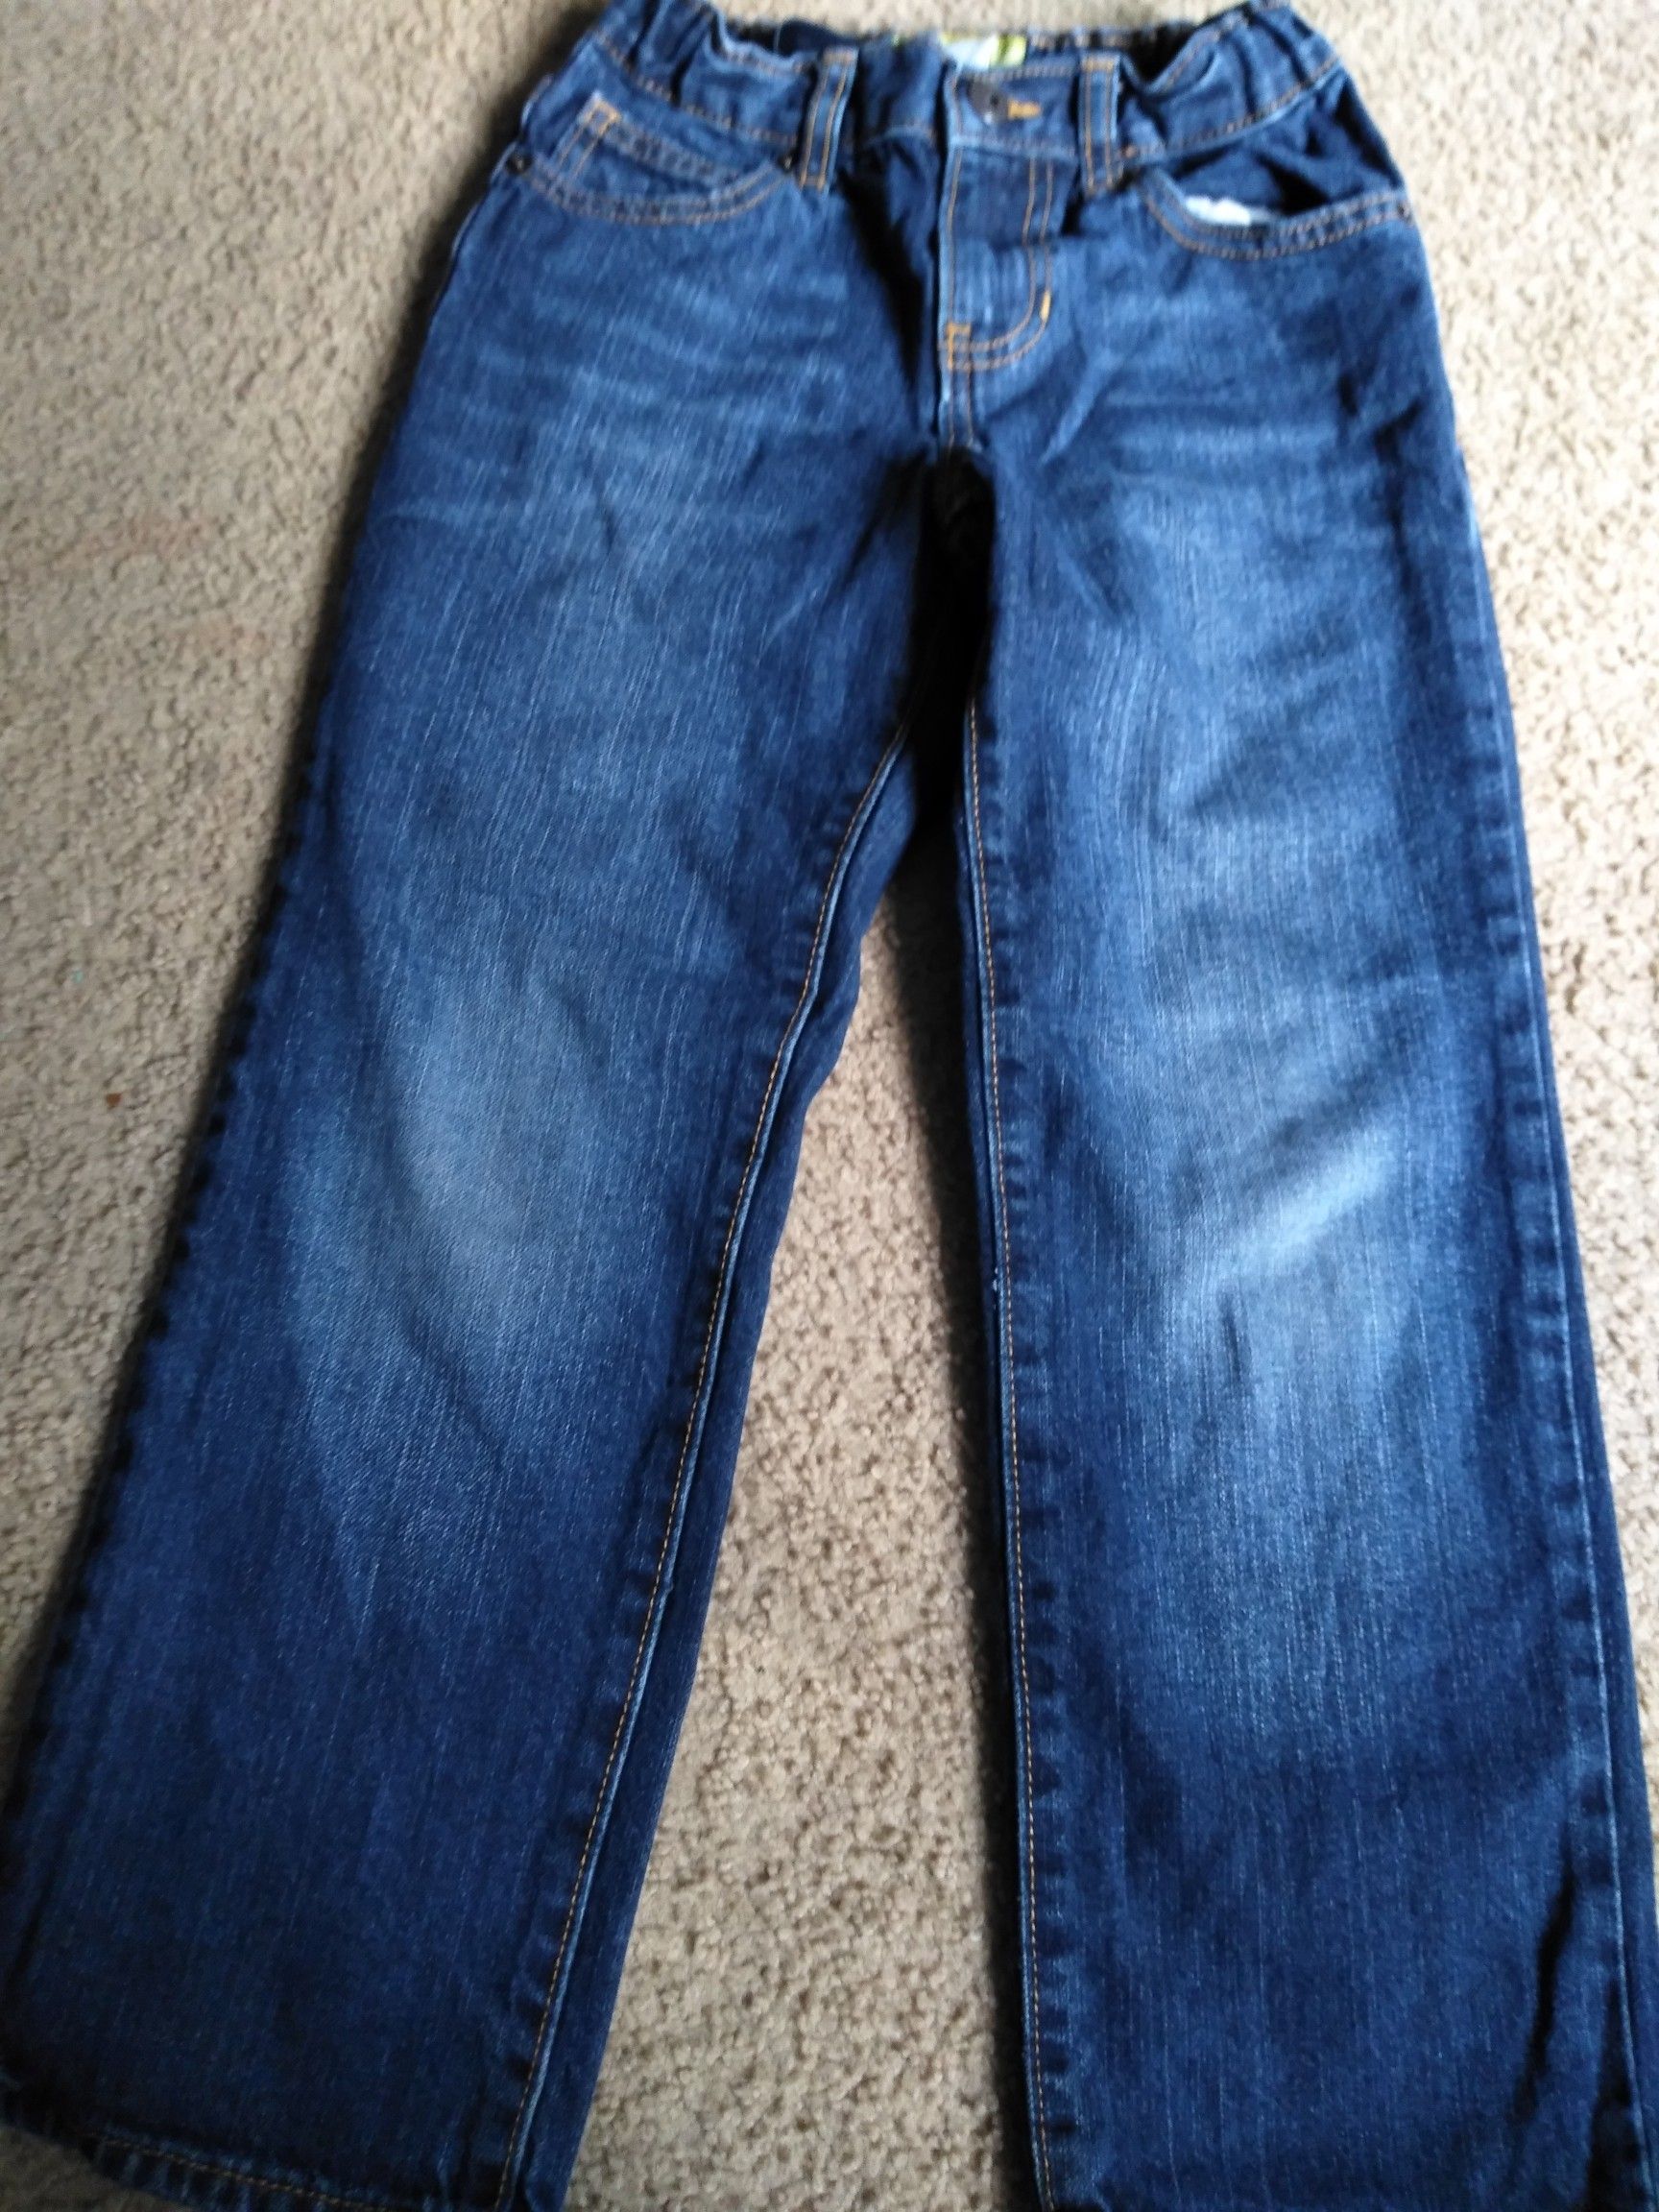 Oldnavy jeans for boy size 7 used good condition